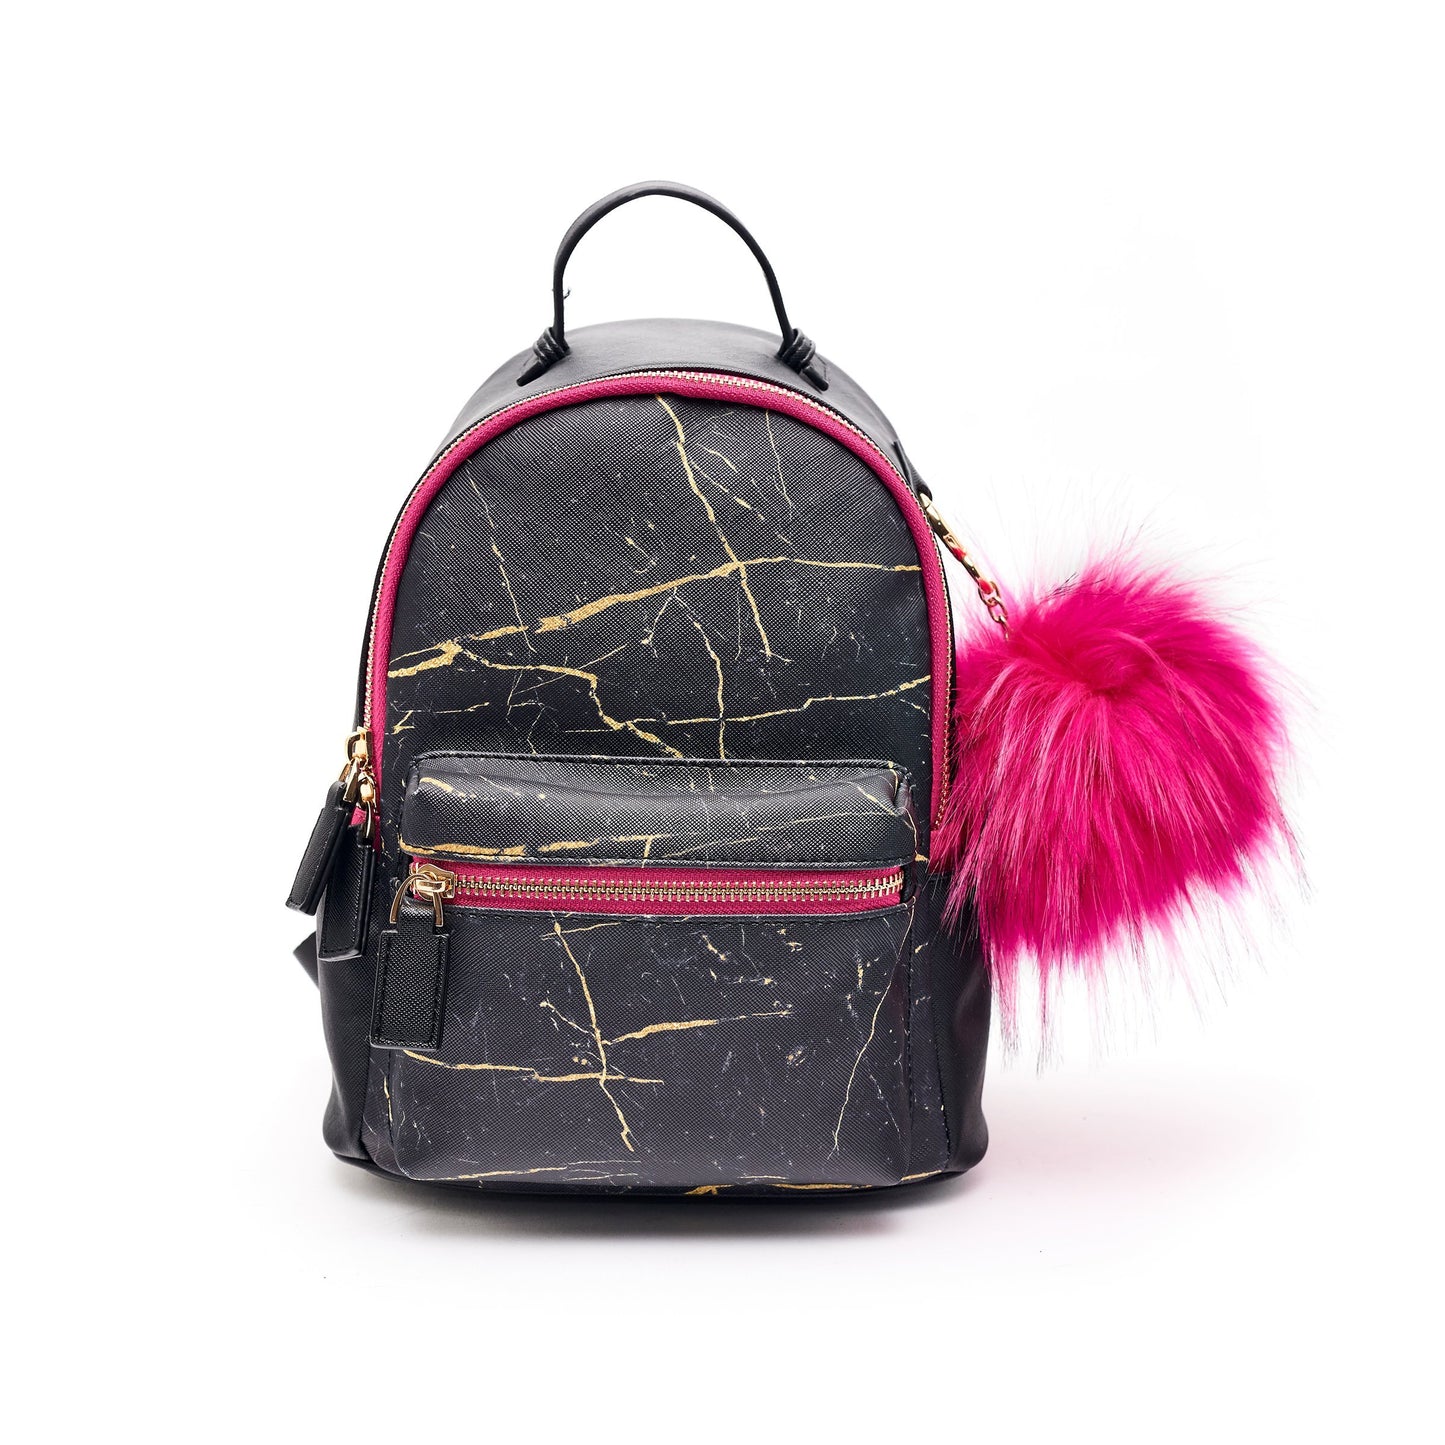 Remy Mini Backpack Purse Black Marble